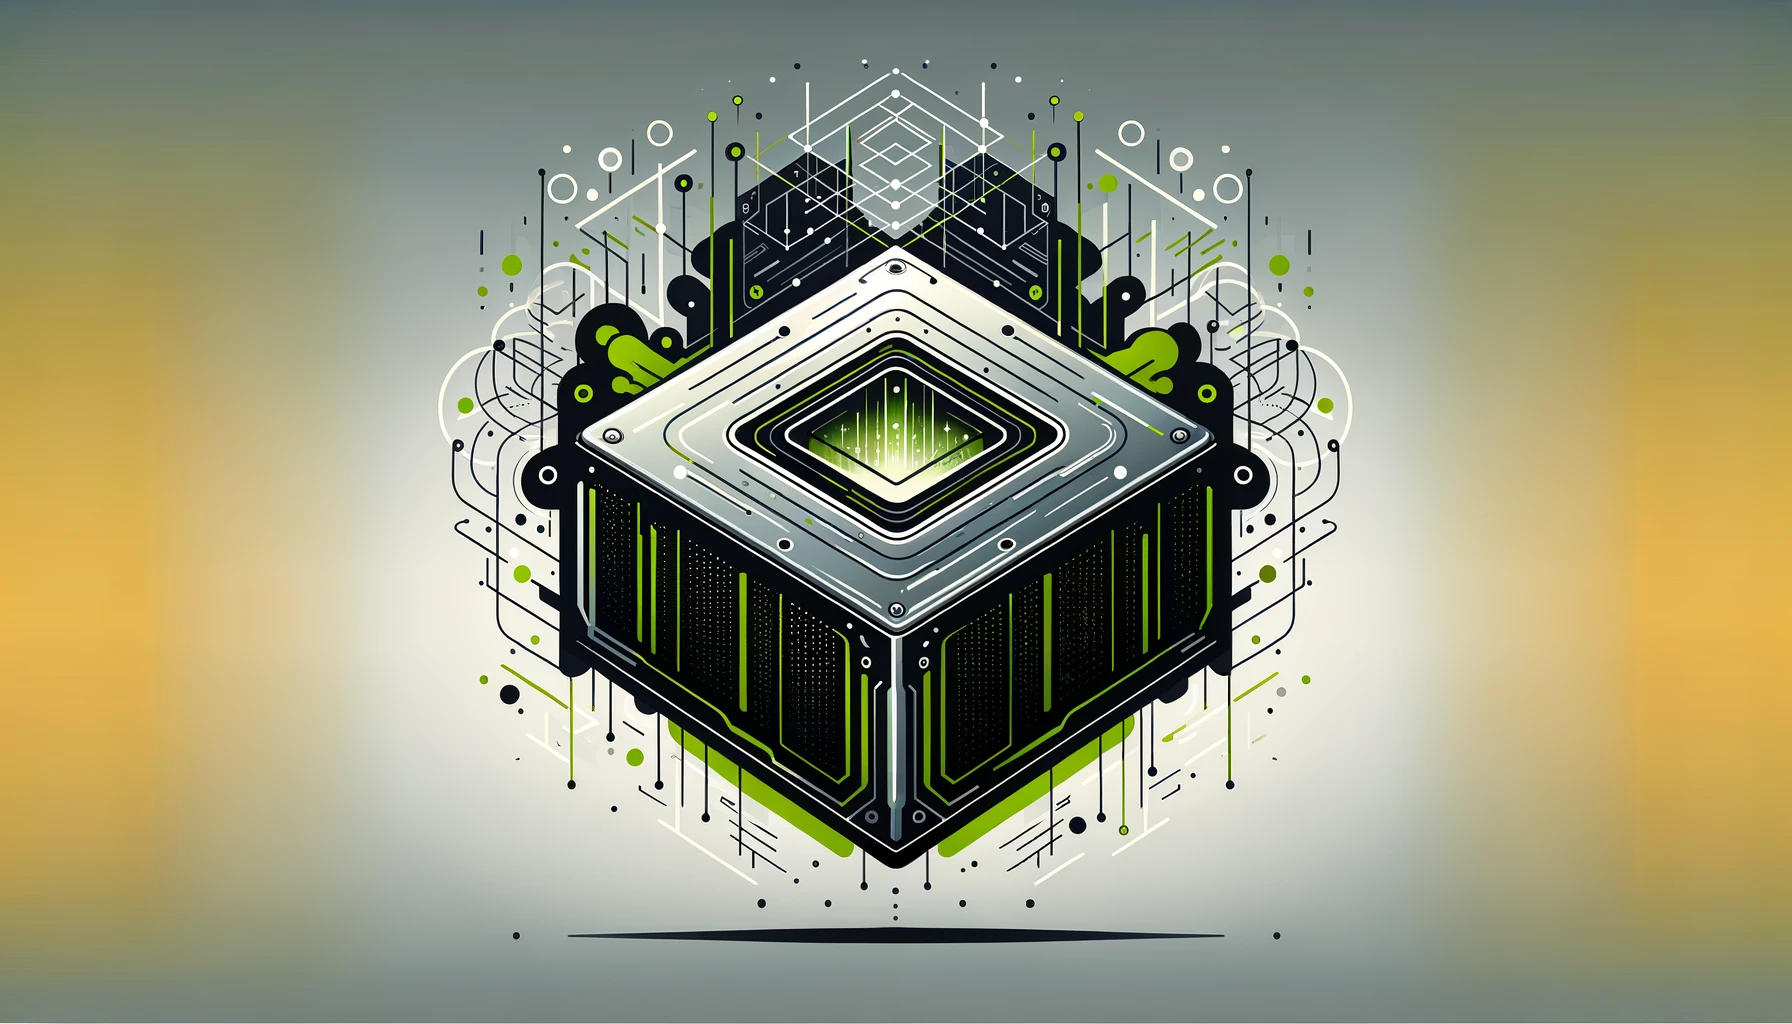 Nvidia proudly unveils quantum computer centers powered by the new CUDA-Q platform.